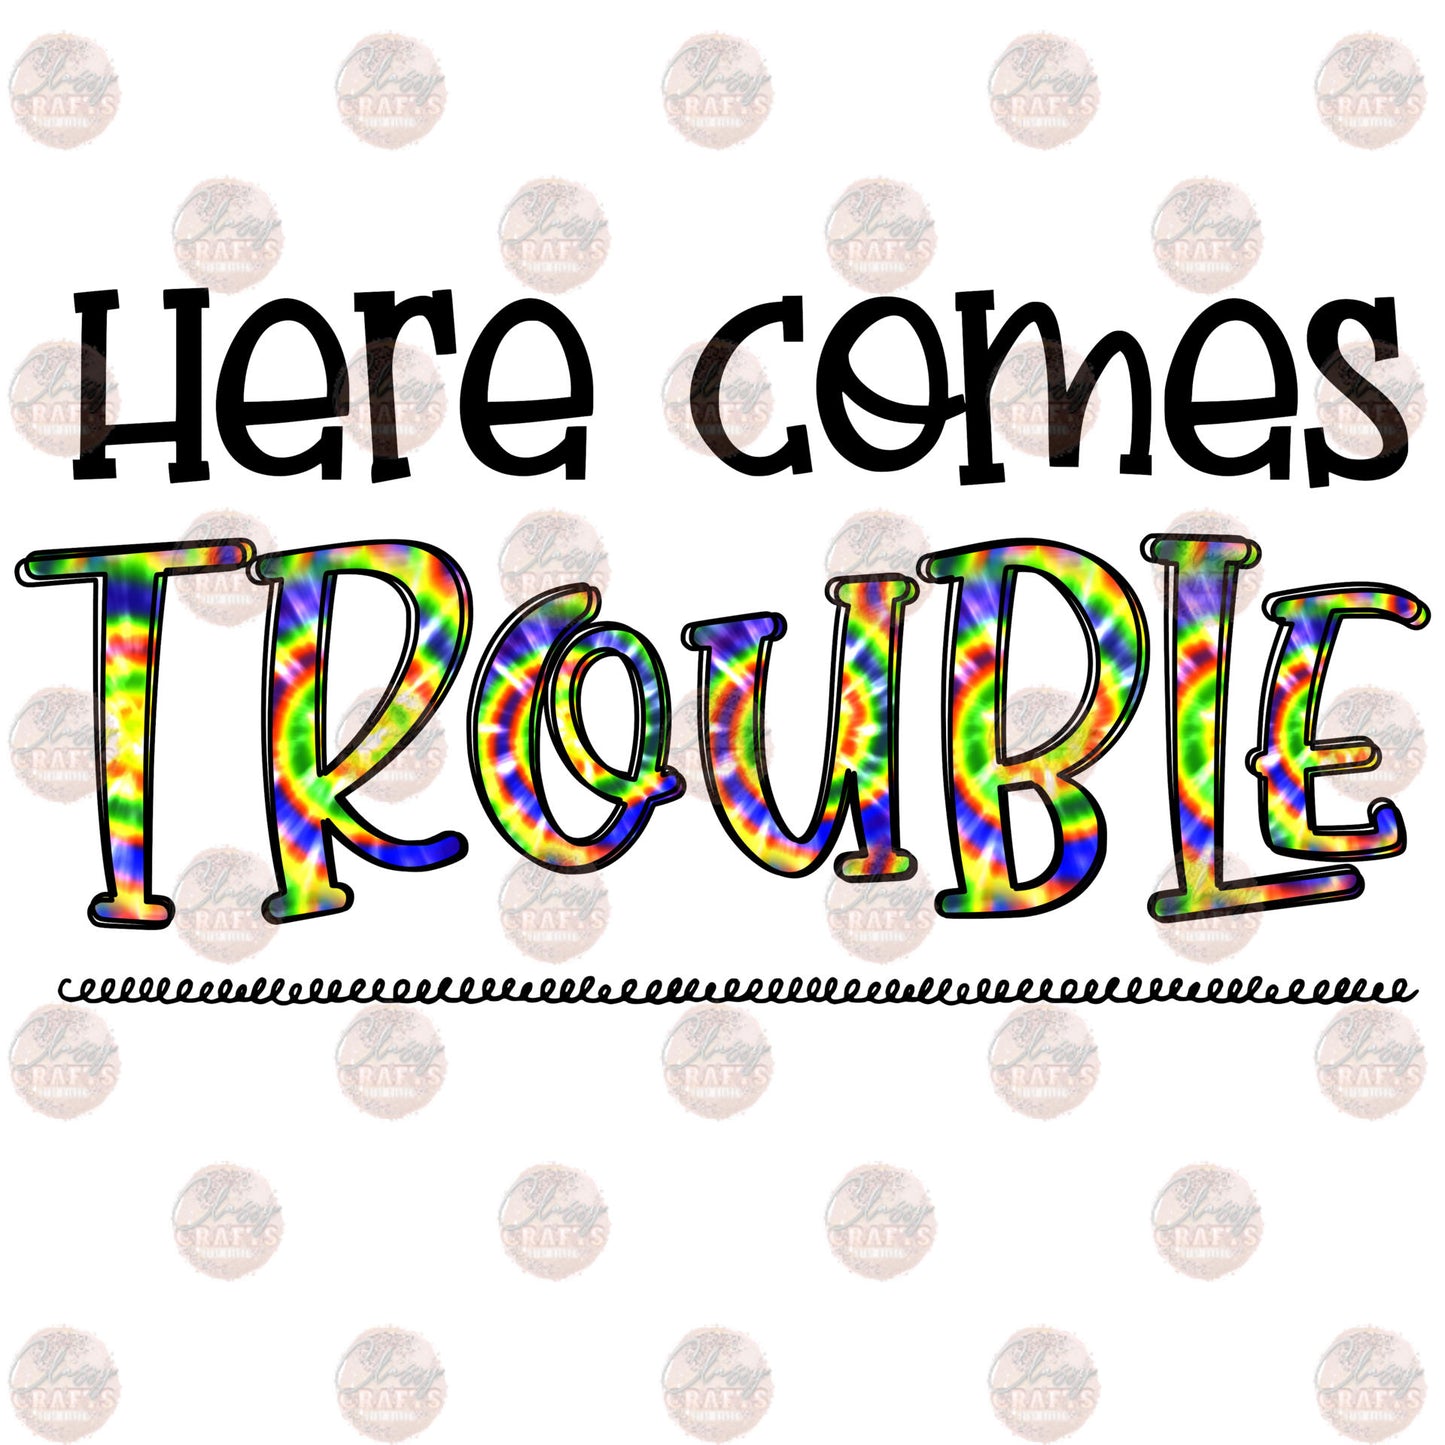 Here Comes Trouble - Sublimation Transfer